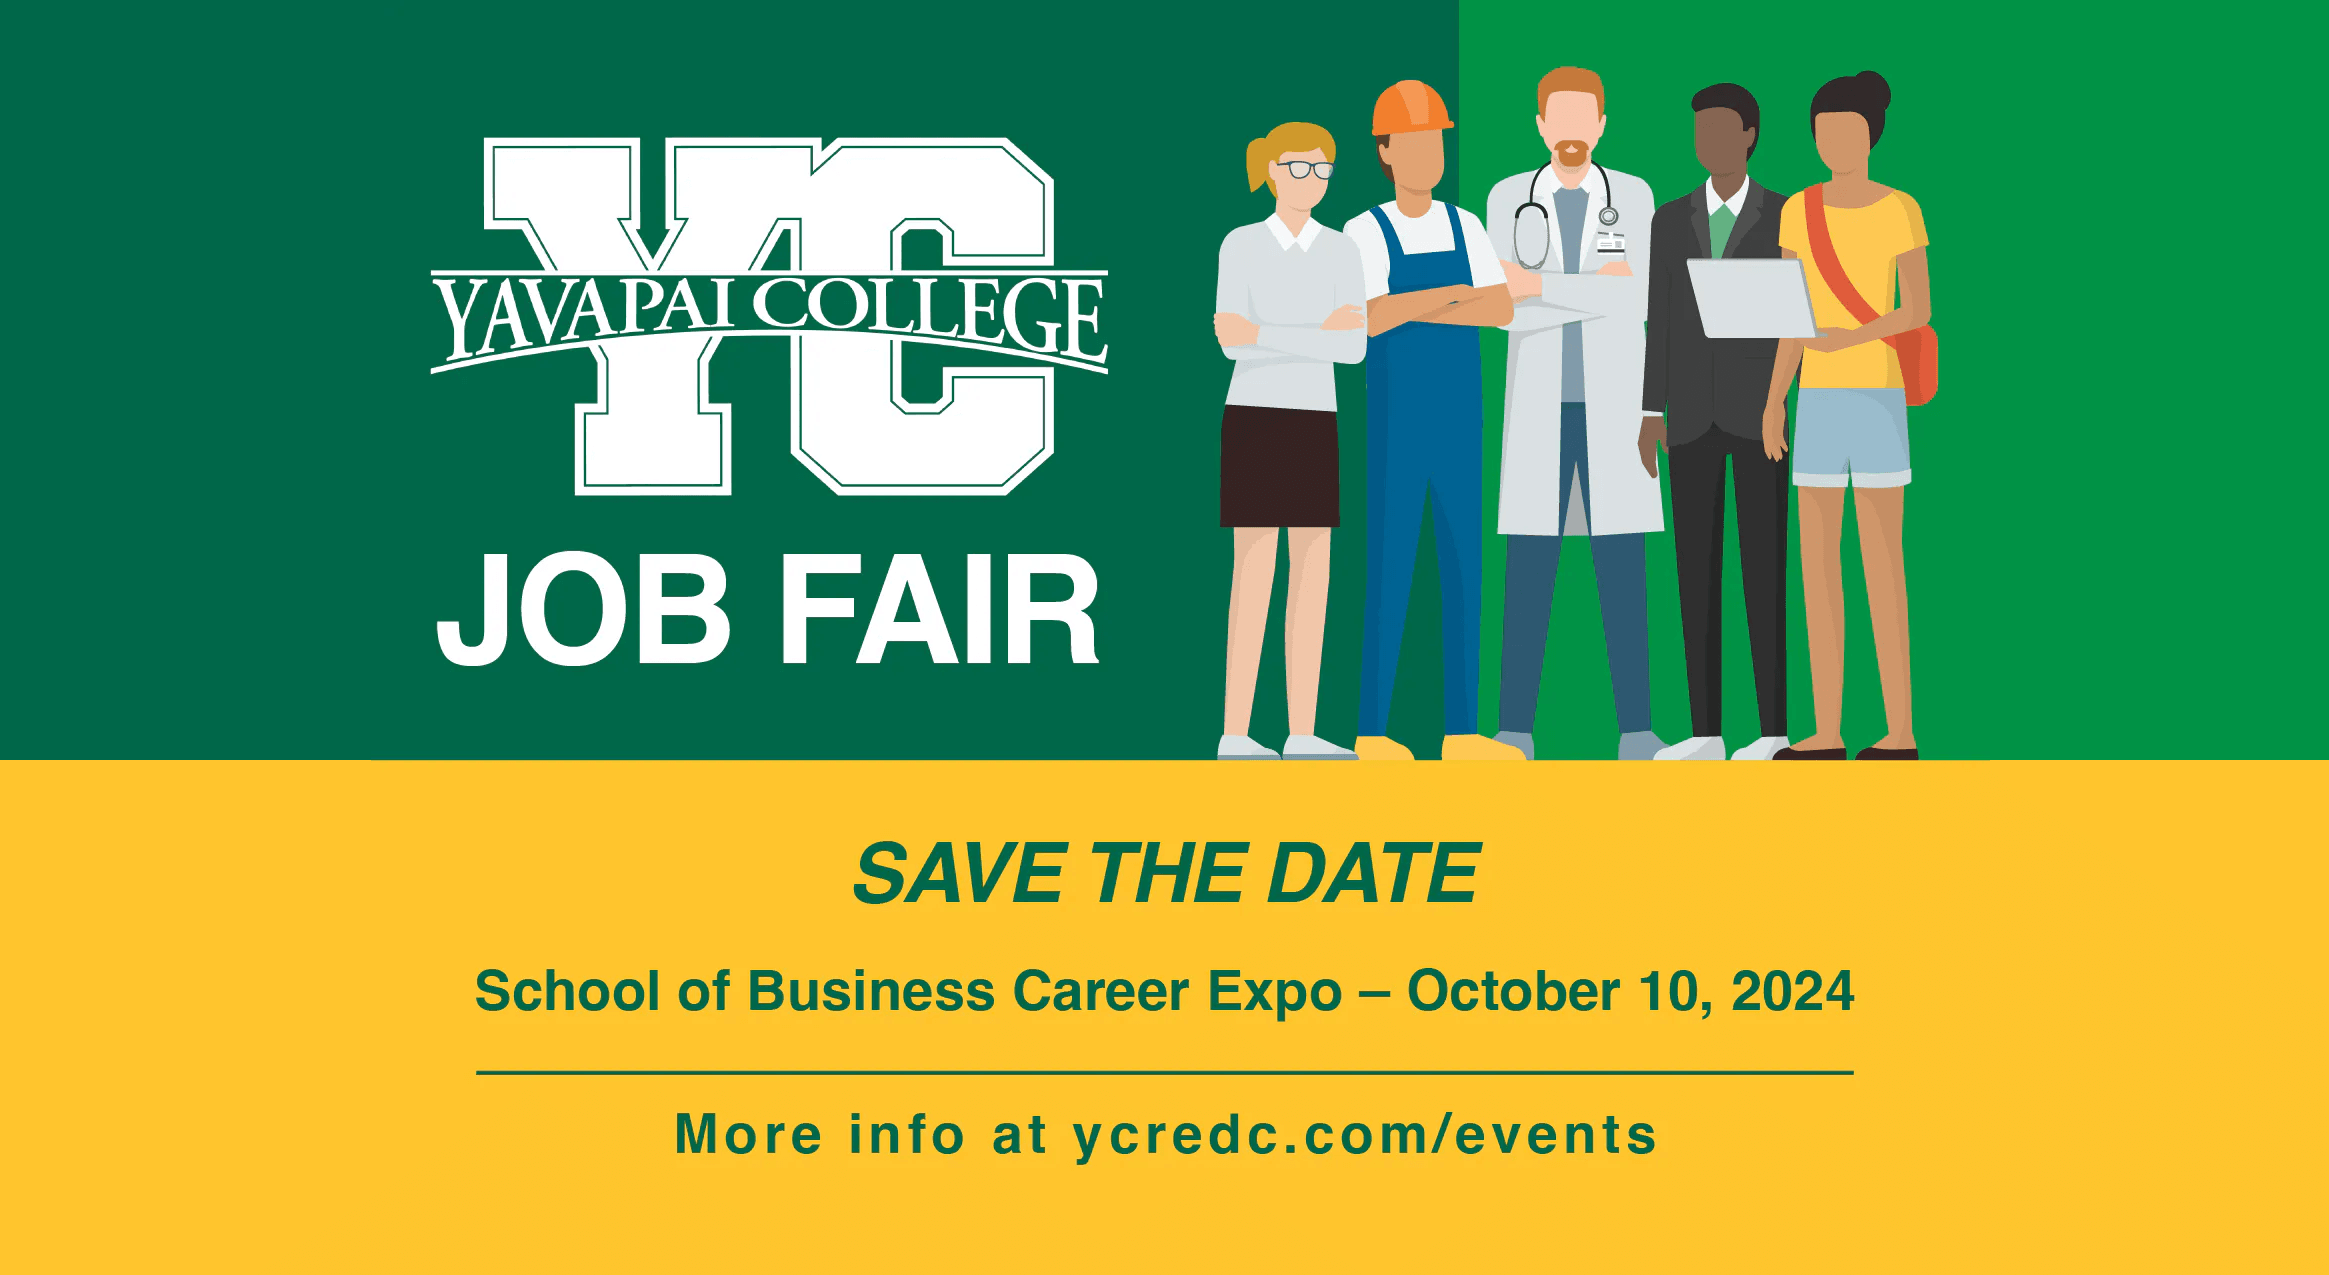 School of Business Career Expo: Save the Date!